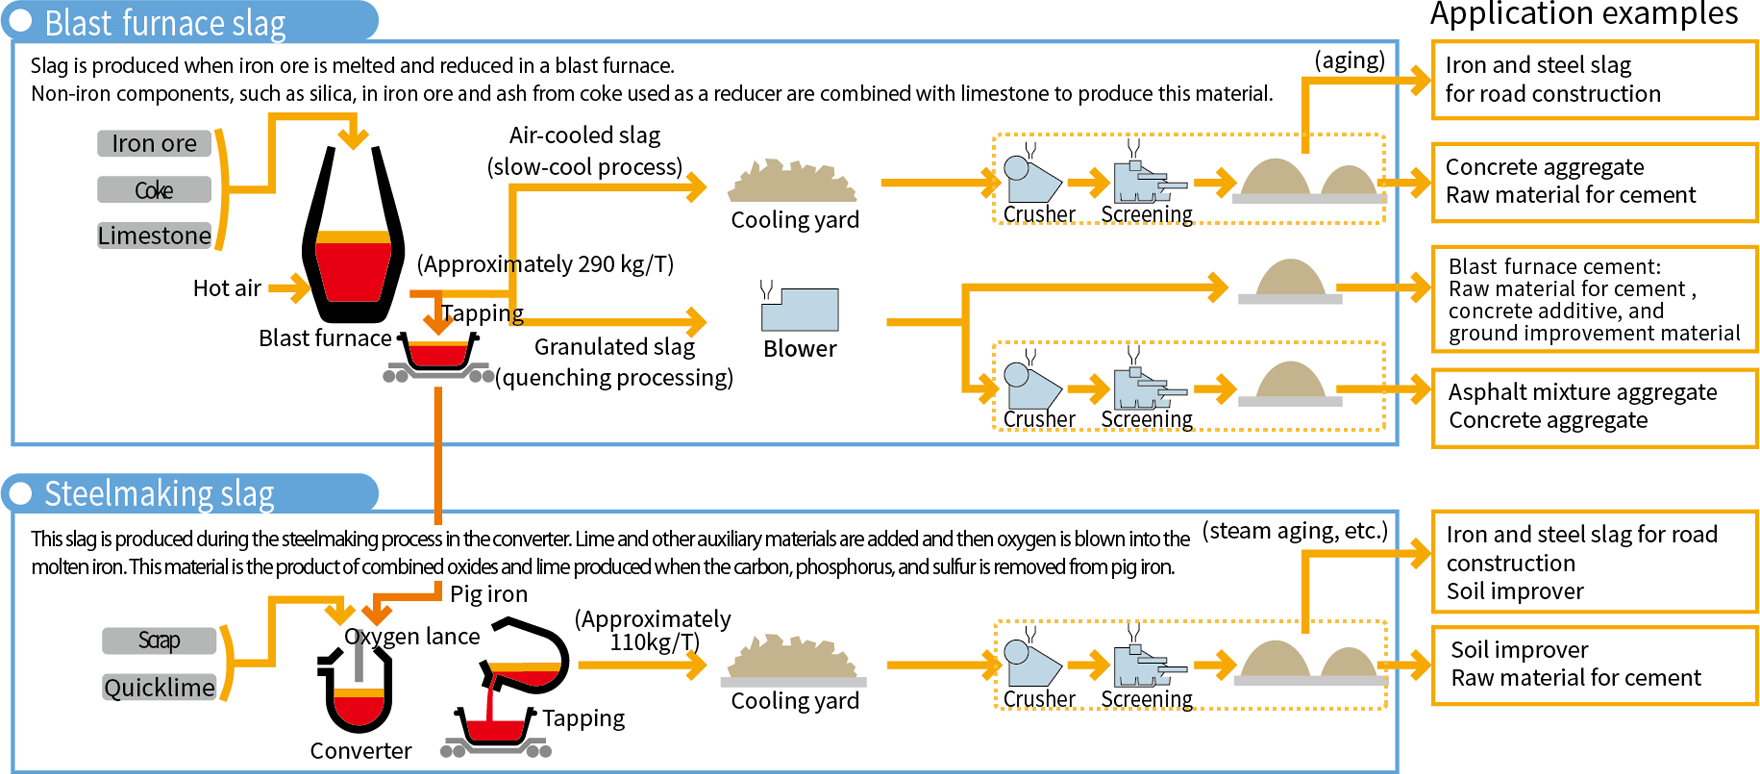 Manufacturing Process of Main Iron and Steel Slag Products